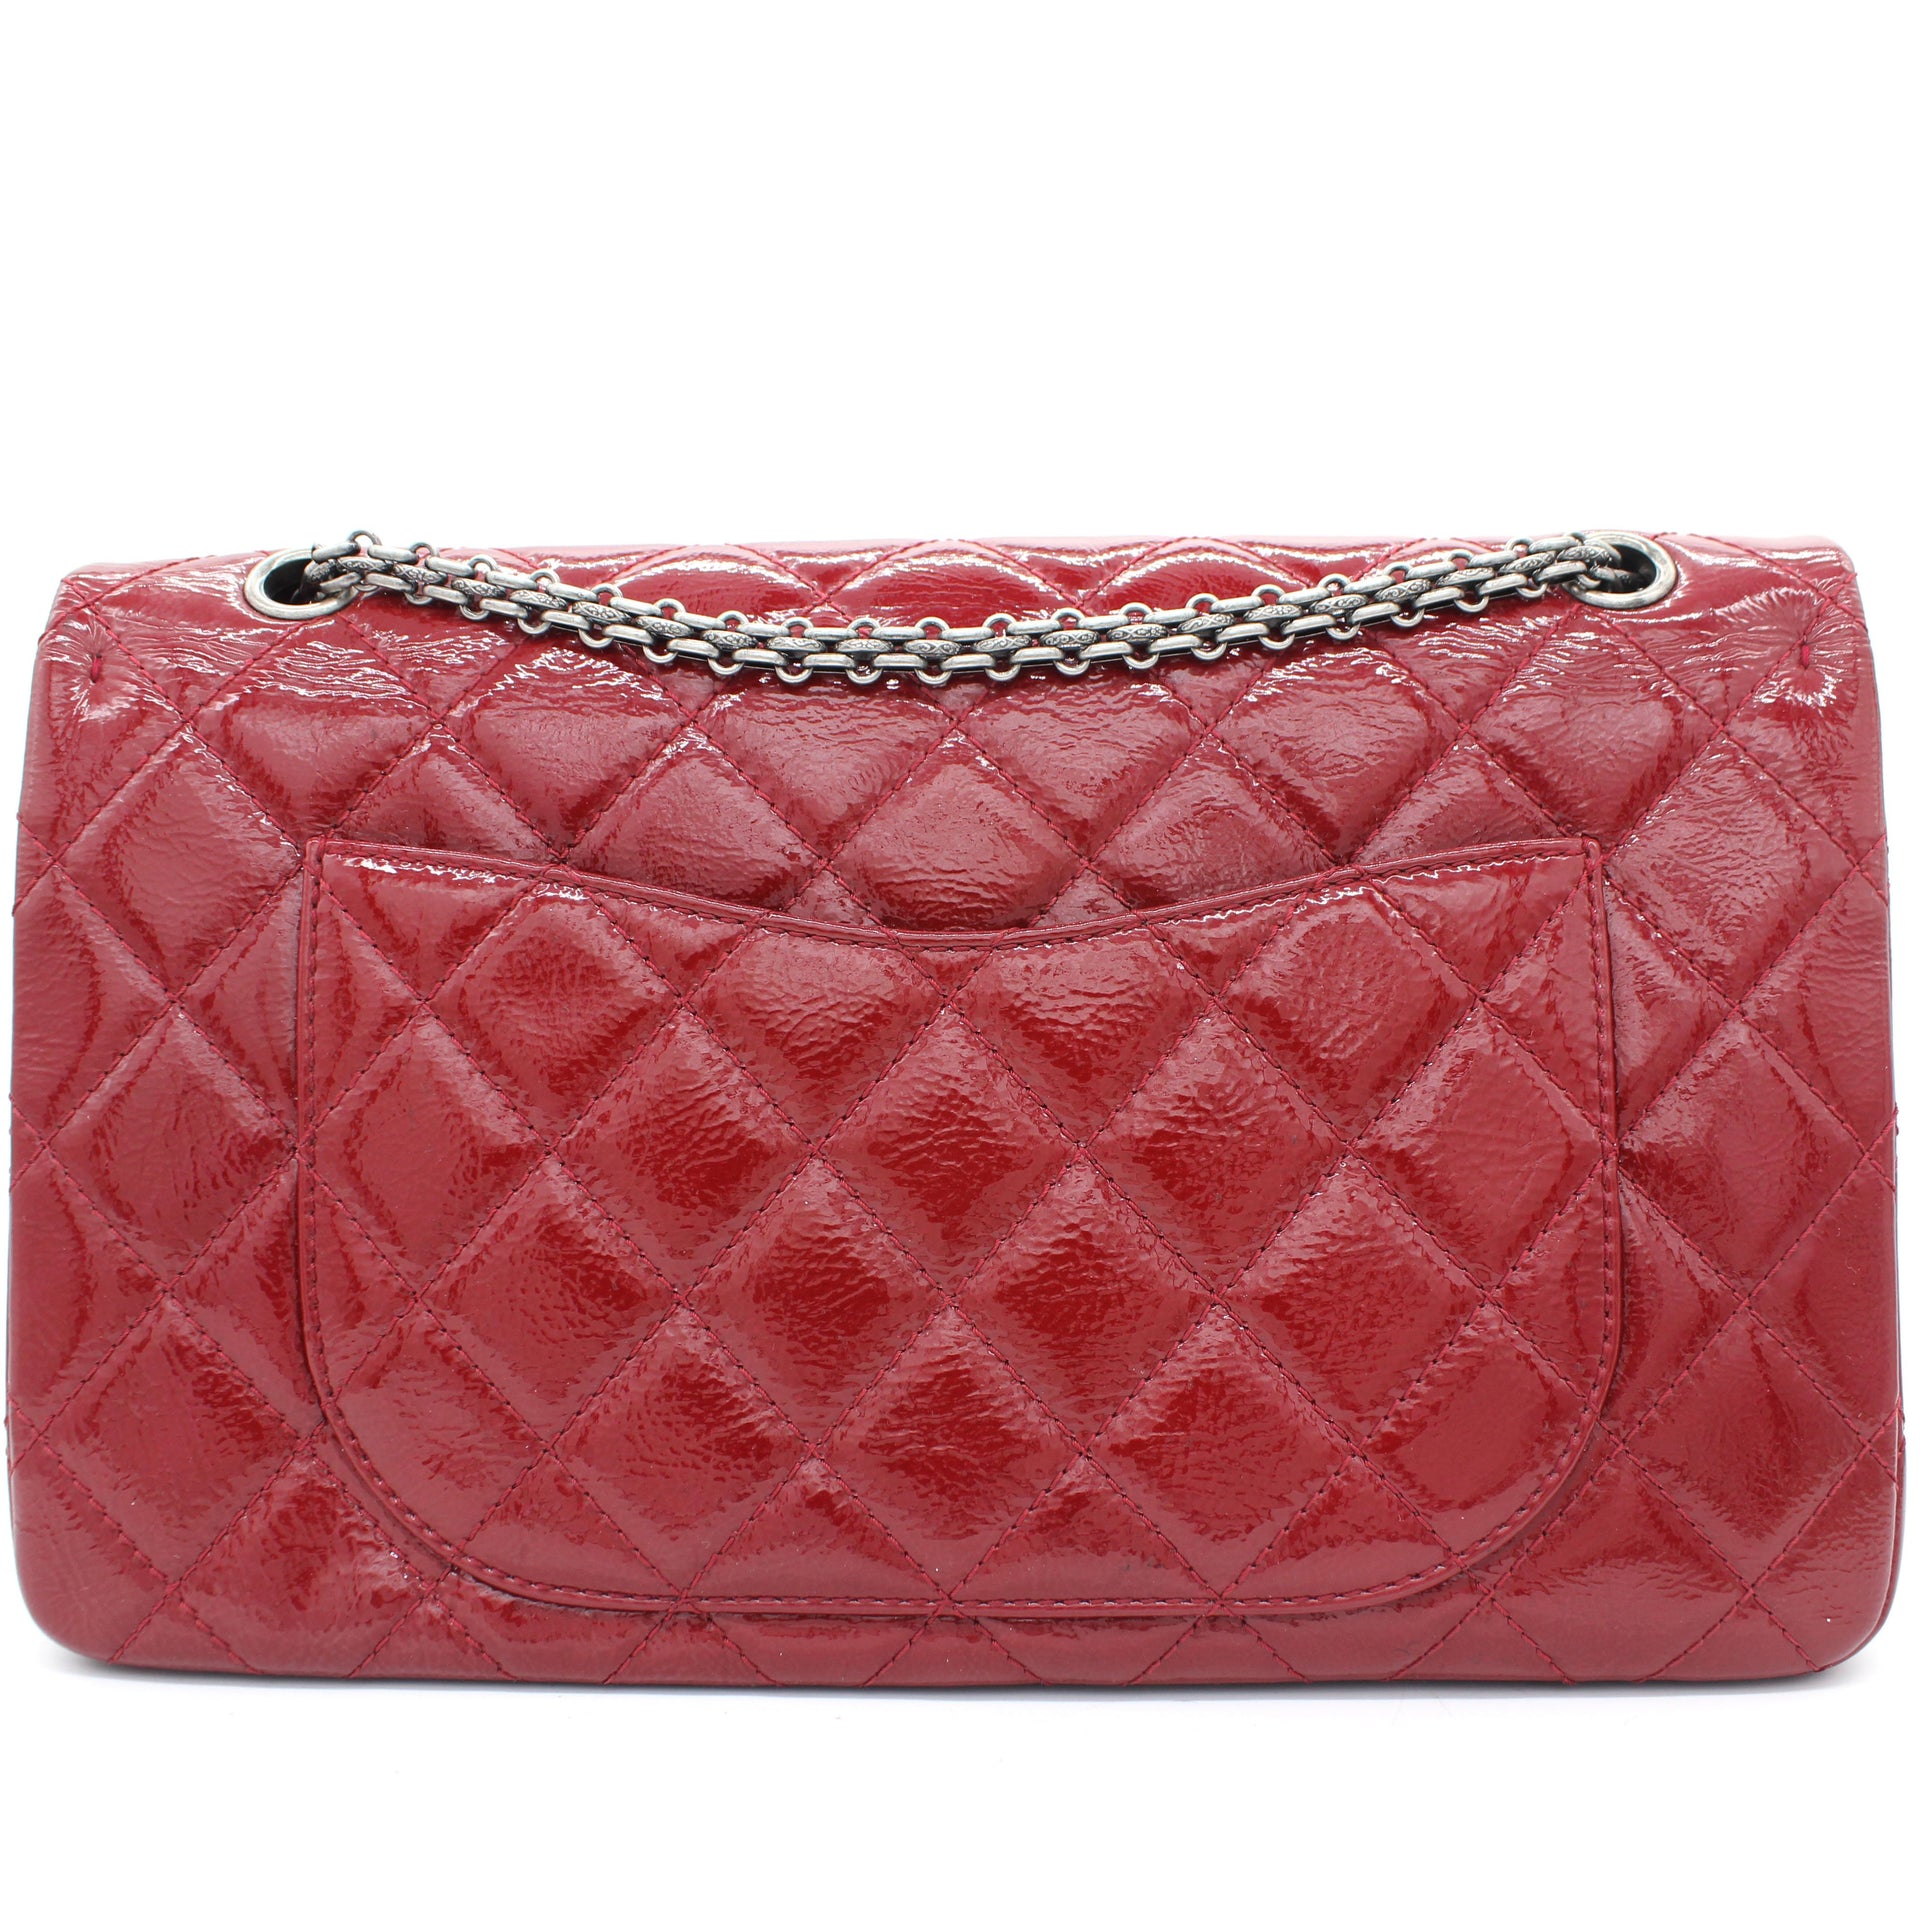 Red Quilted Patent Leather Jumbo Reissue 2.55 277